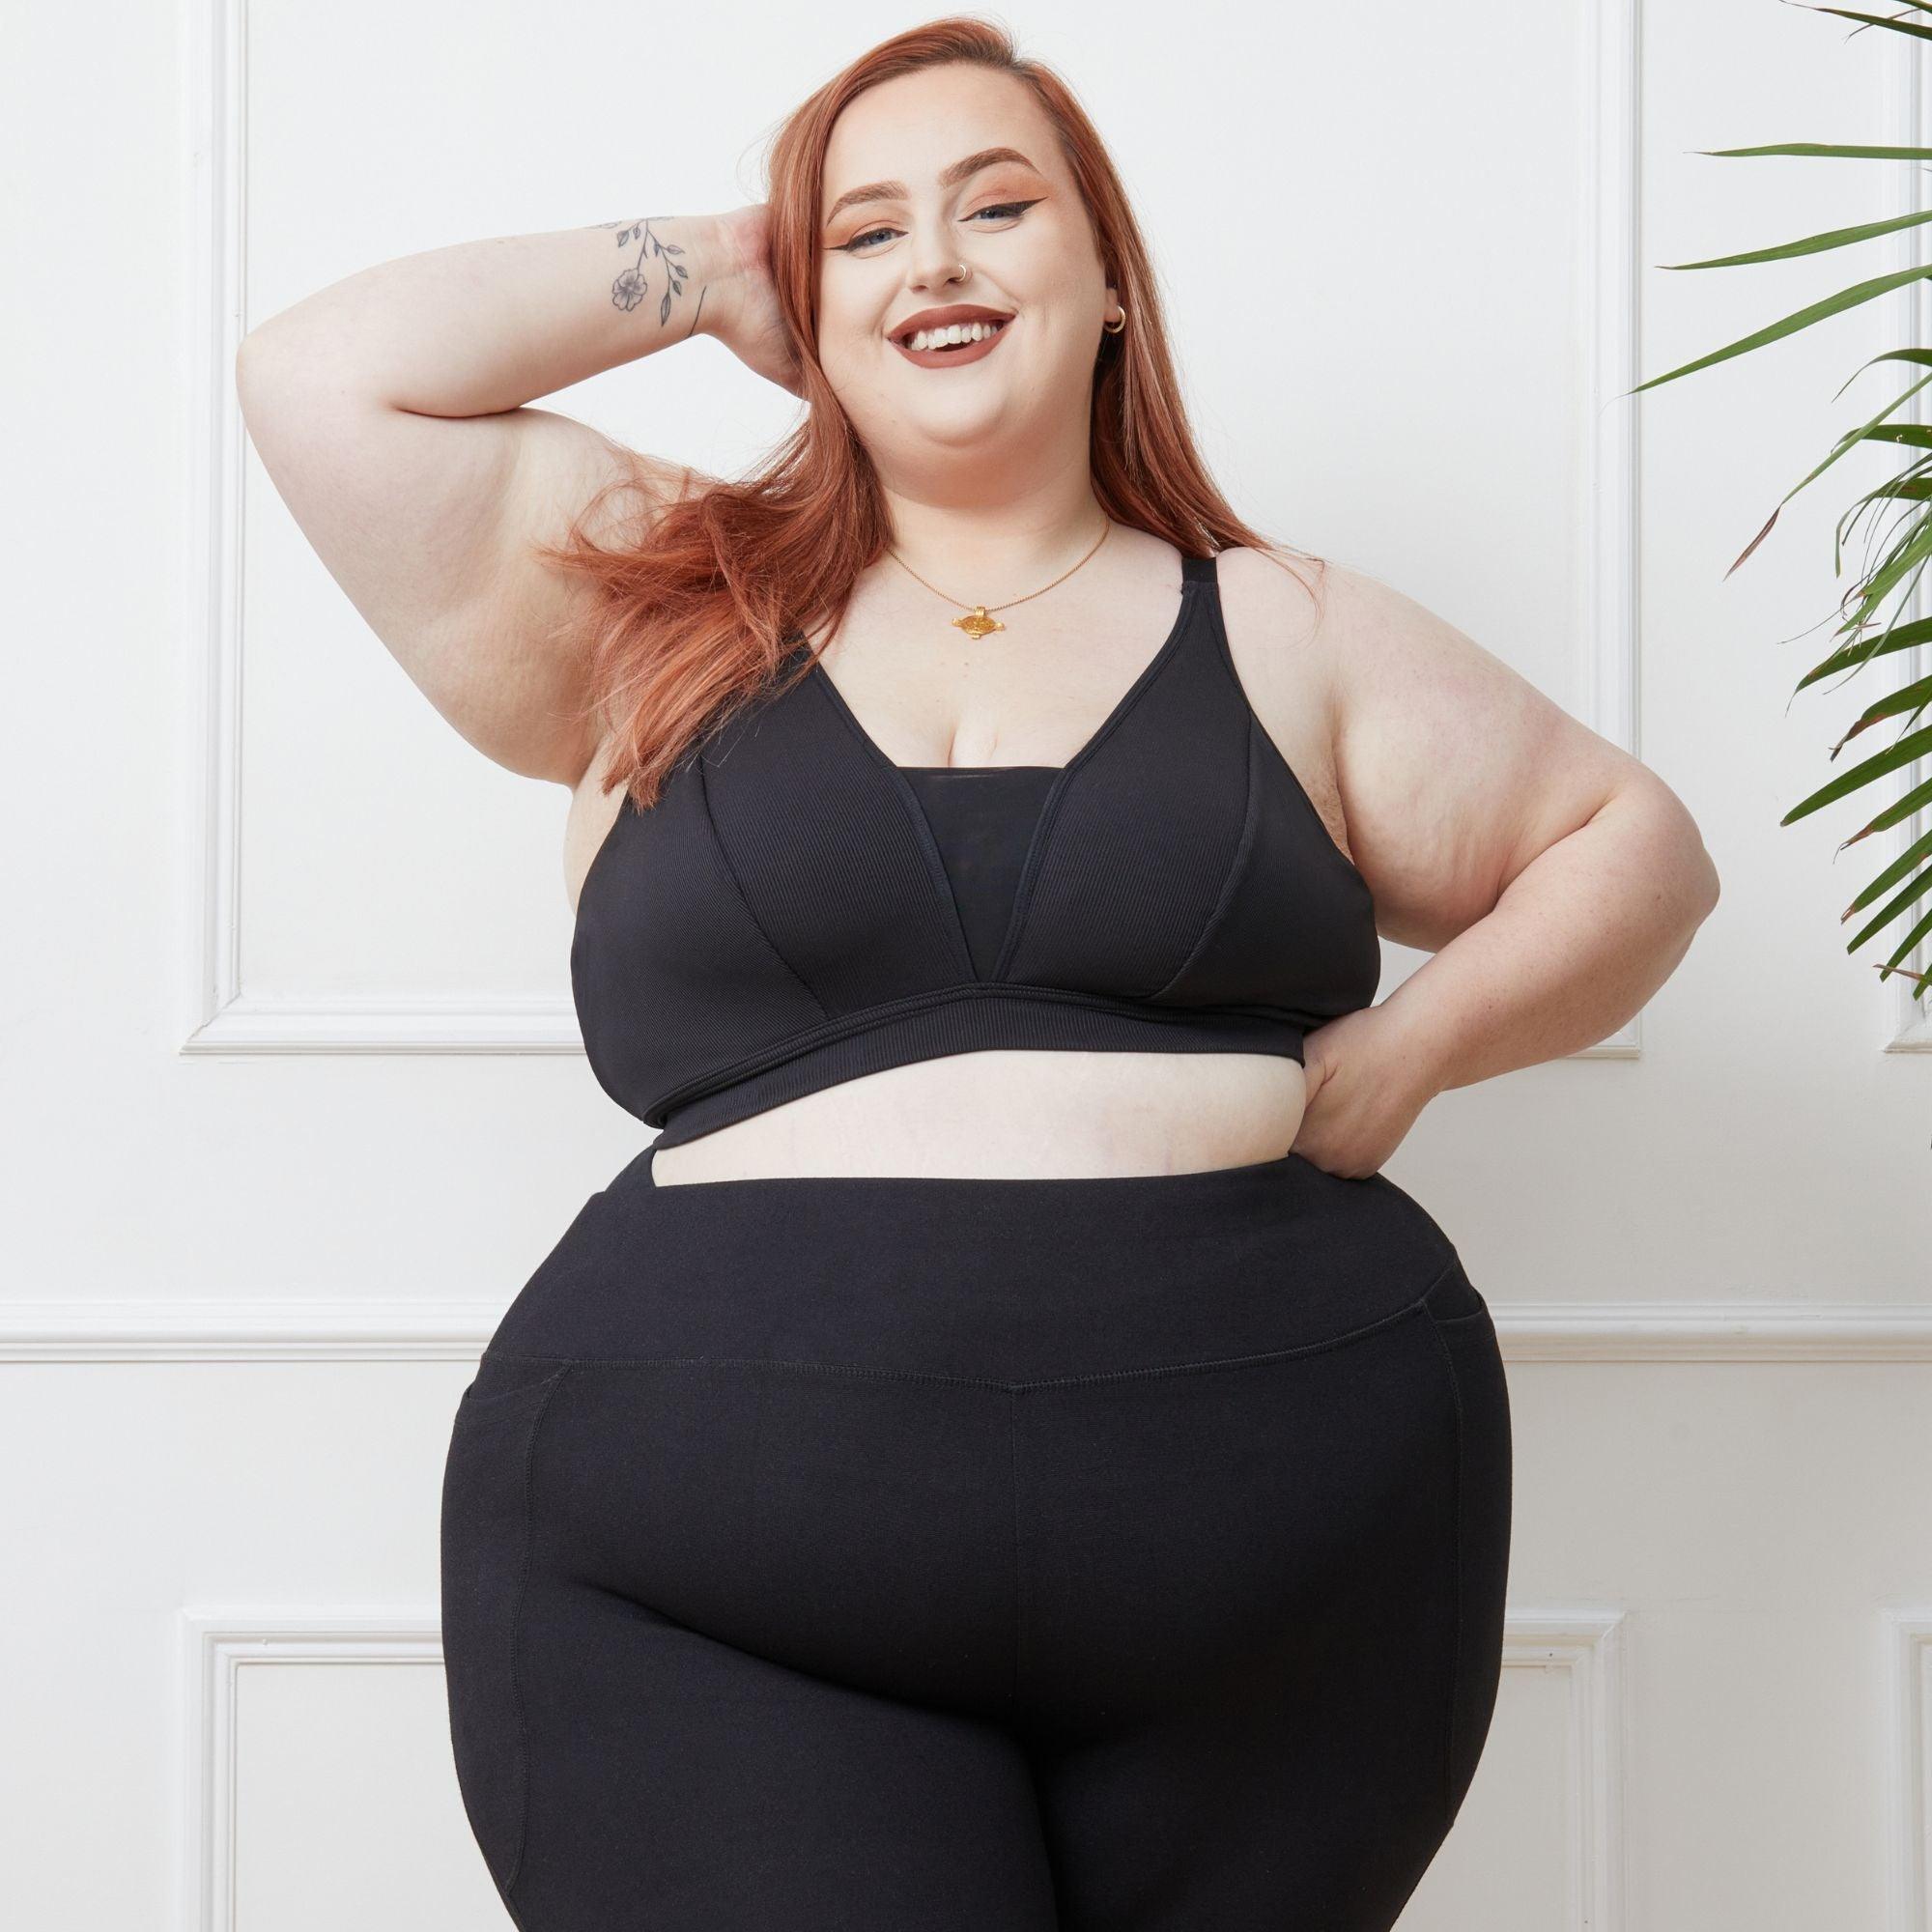 Go go go - best bra from @Snag Tights ever you won't regret it